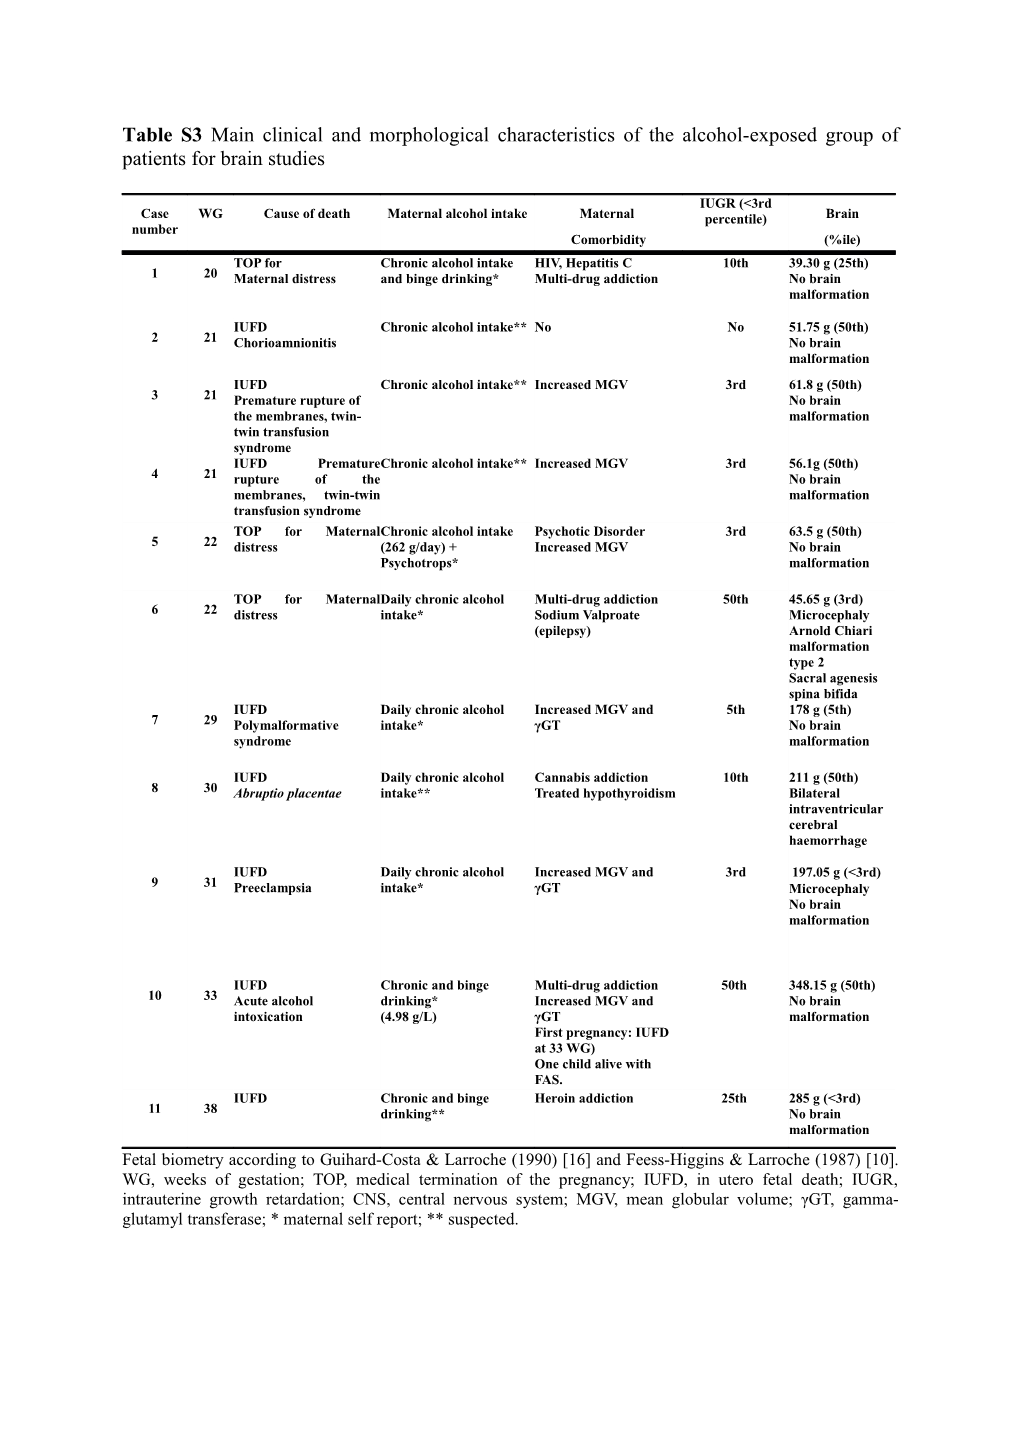 Table S3 Main Clinical and Morphological Characteristics of the Alcohol-Exposed Group Of